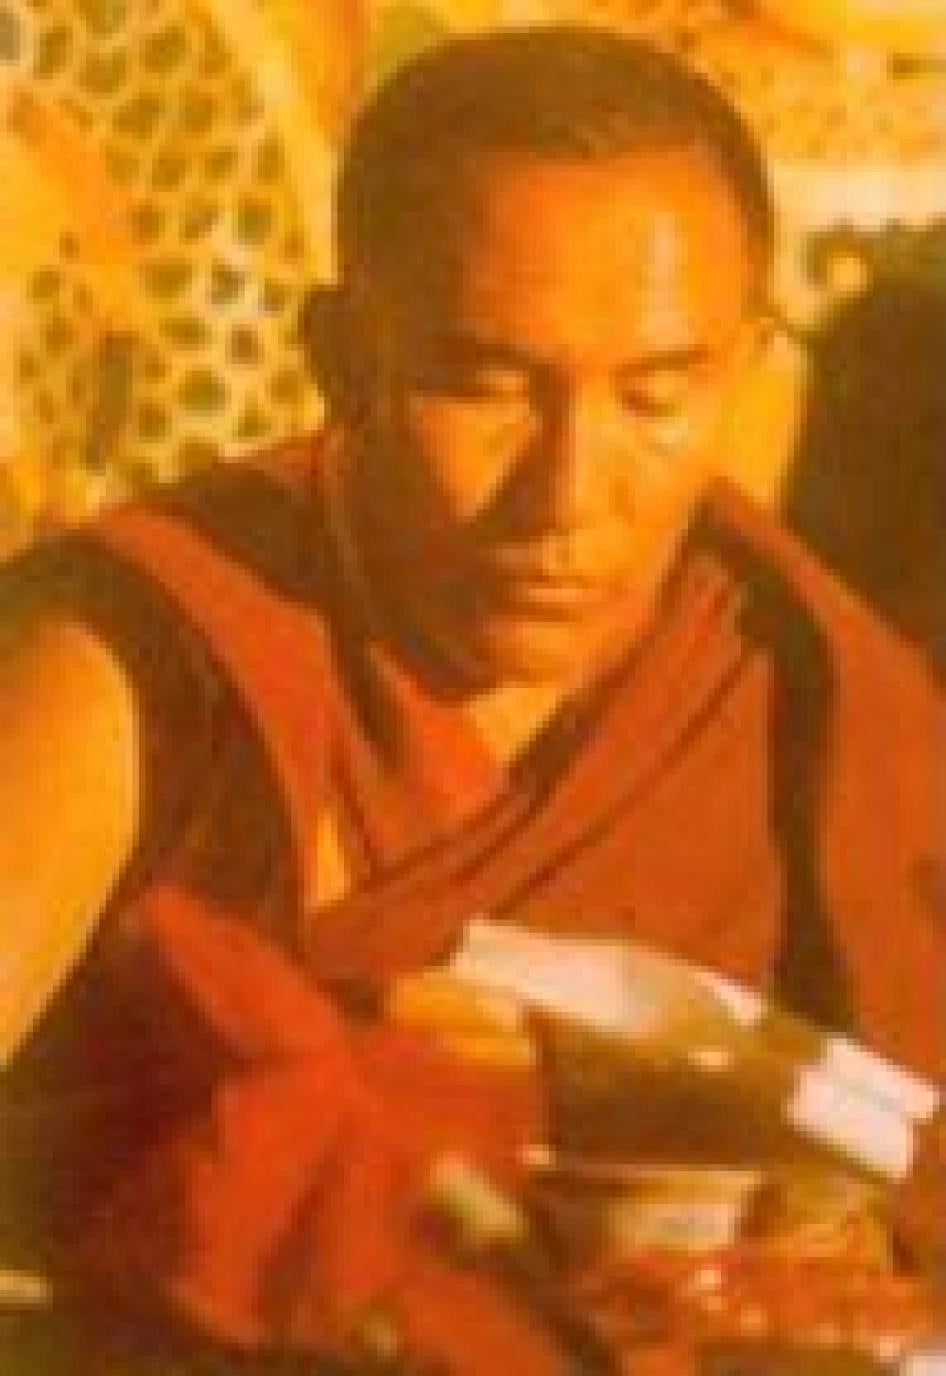 Chatral Rinpoche (Jampa Trinley), former abbot of Tashi Lhunpo monastery and leader of the search for the reincarnation of the 10th Panchen Lama. Date unkown. 